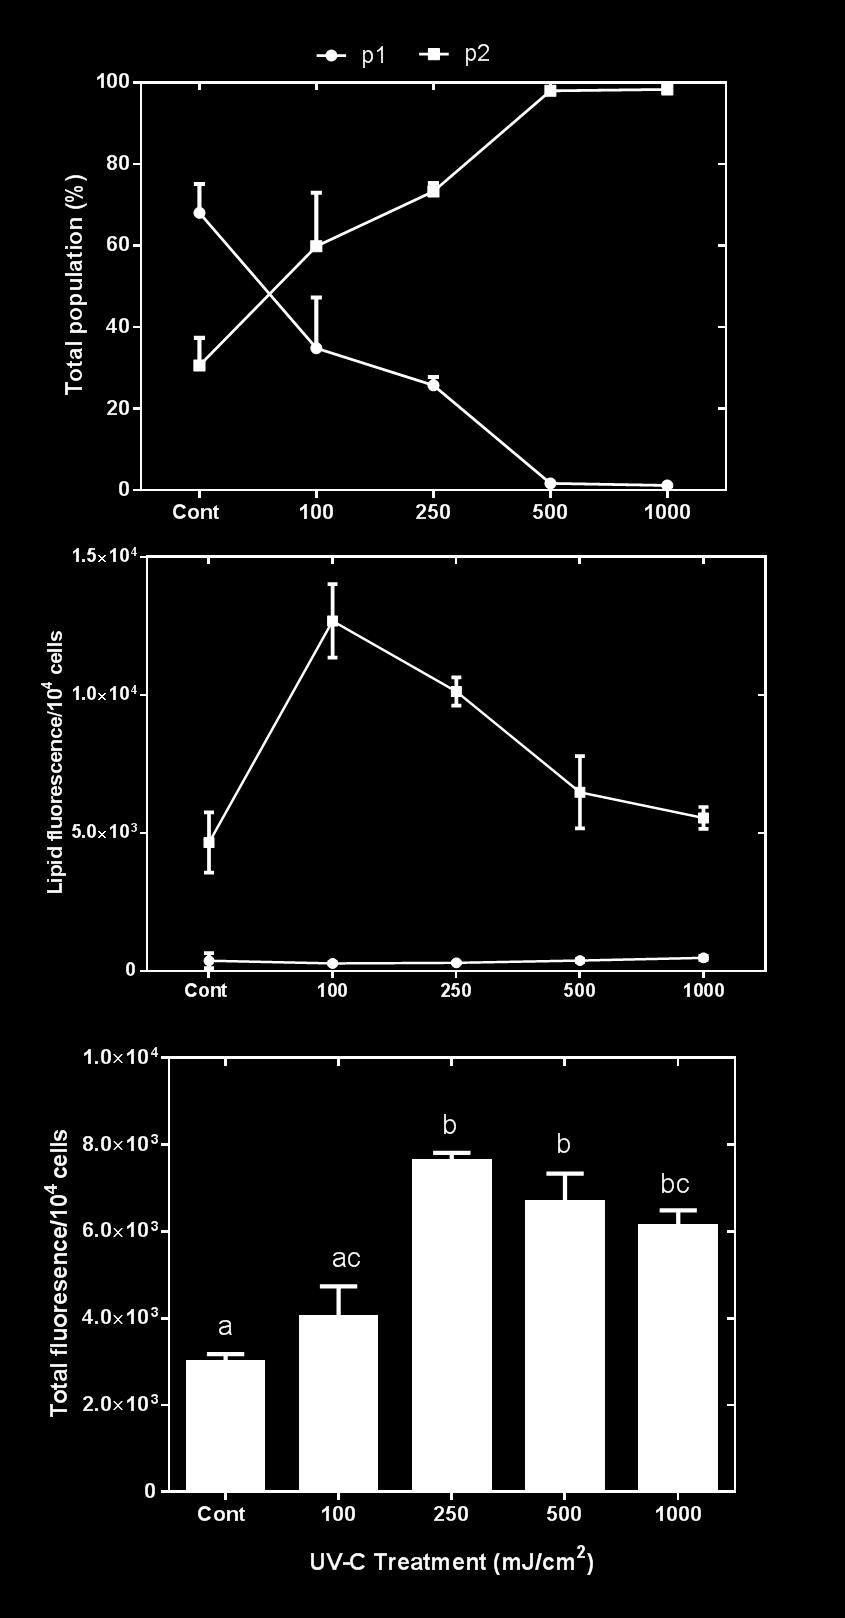 a b c Figure 3: Lipid induction in Nannochloropsis sp. BR2 at 24 h after receiving different UV-C dosages.